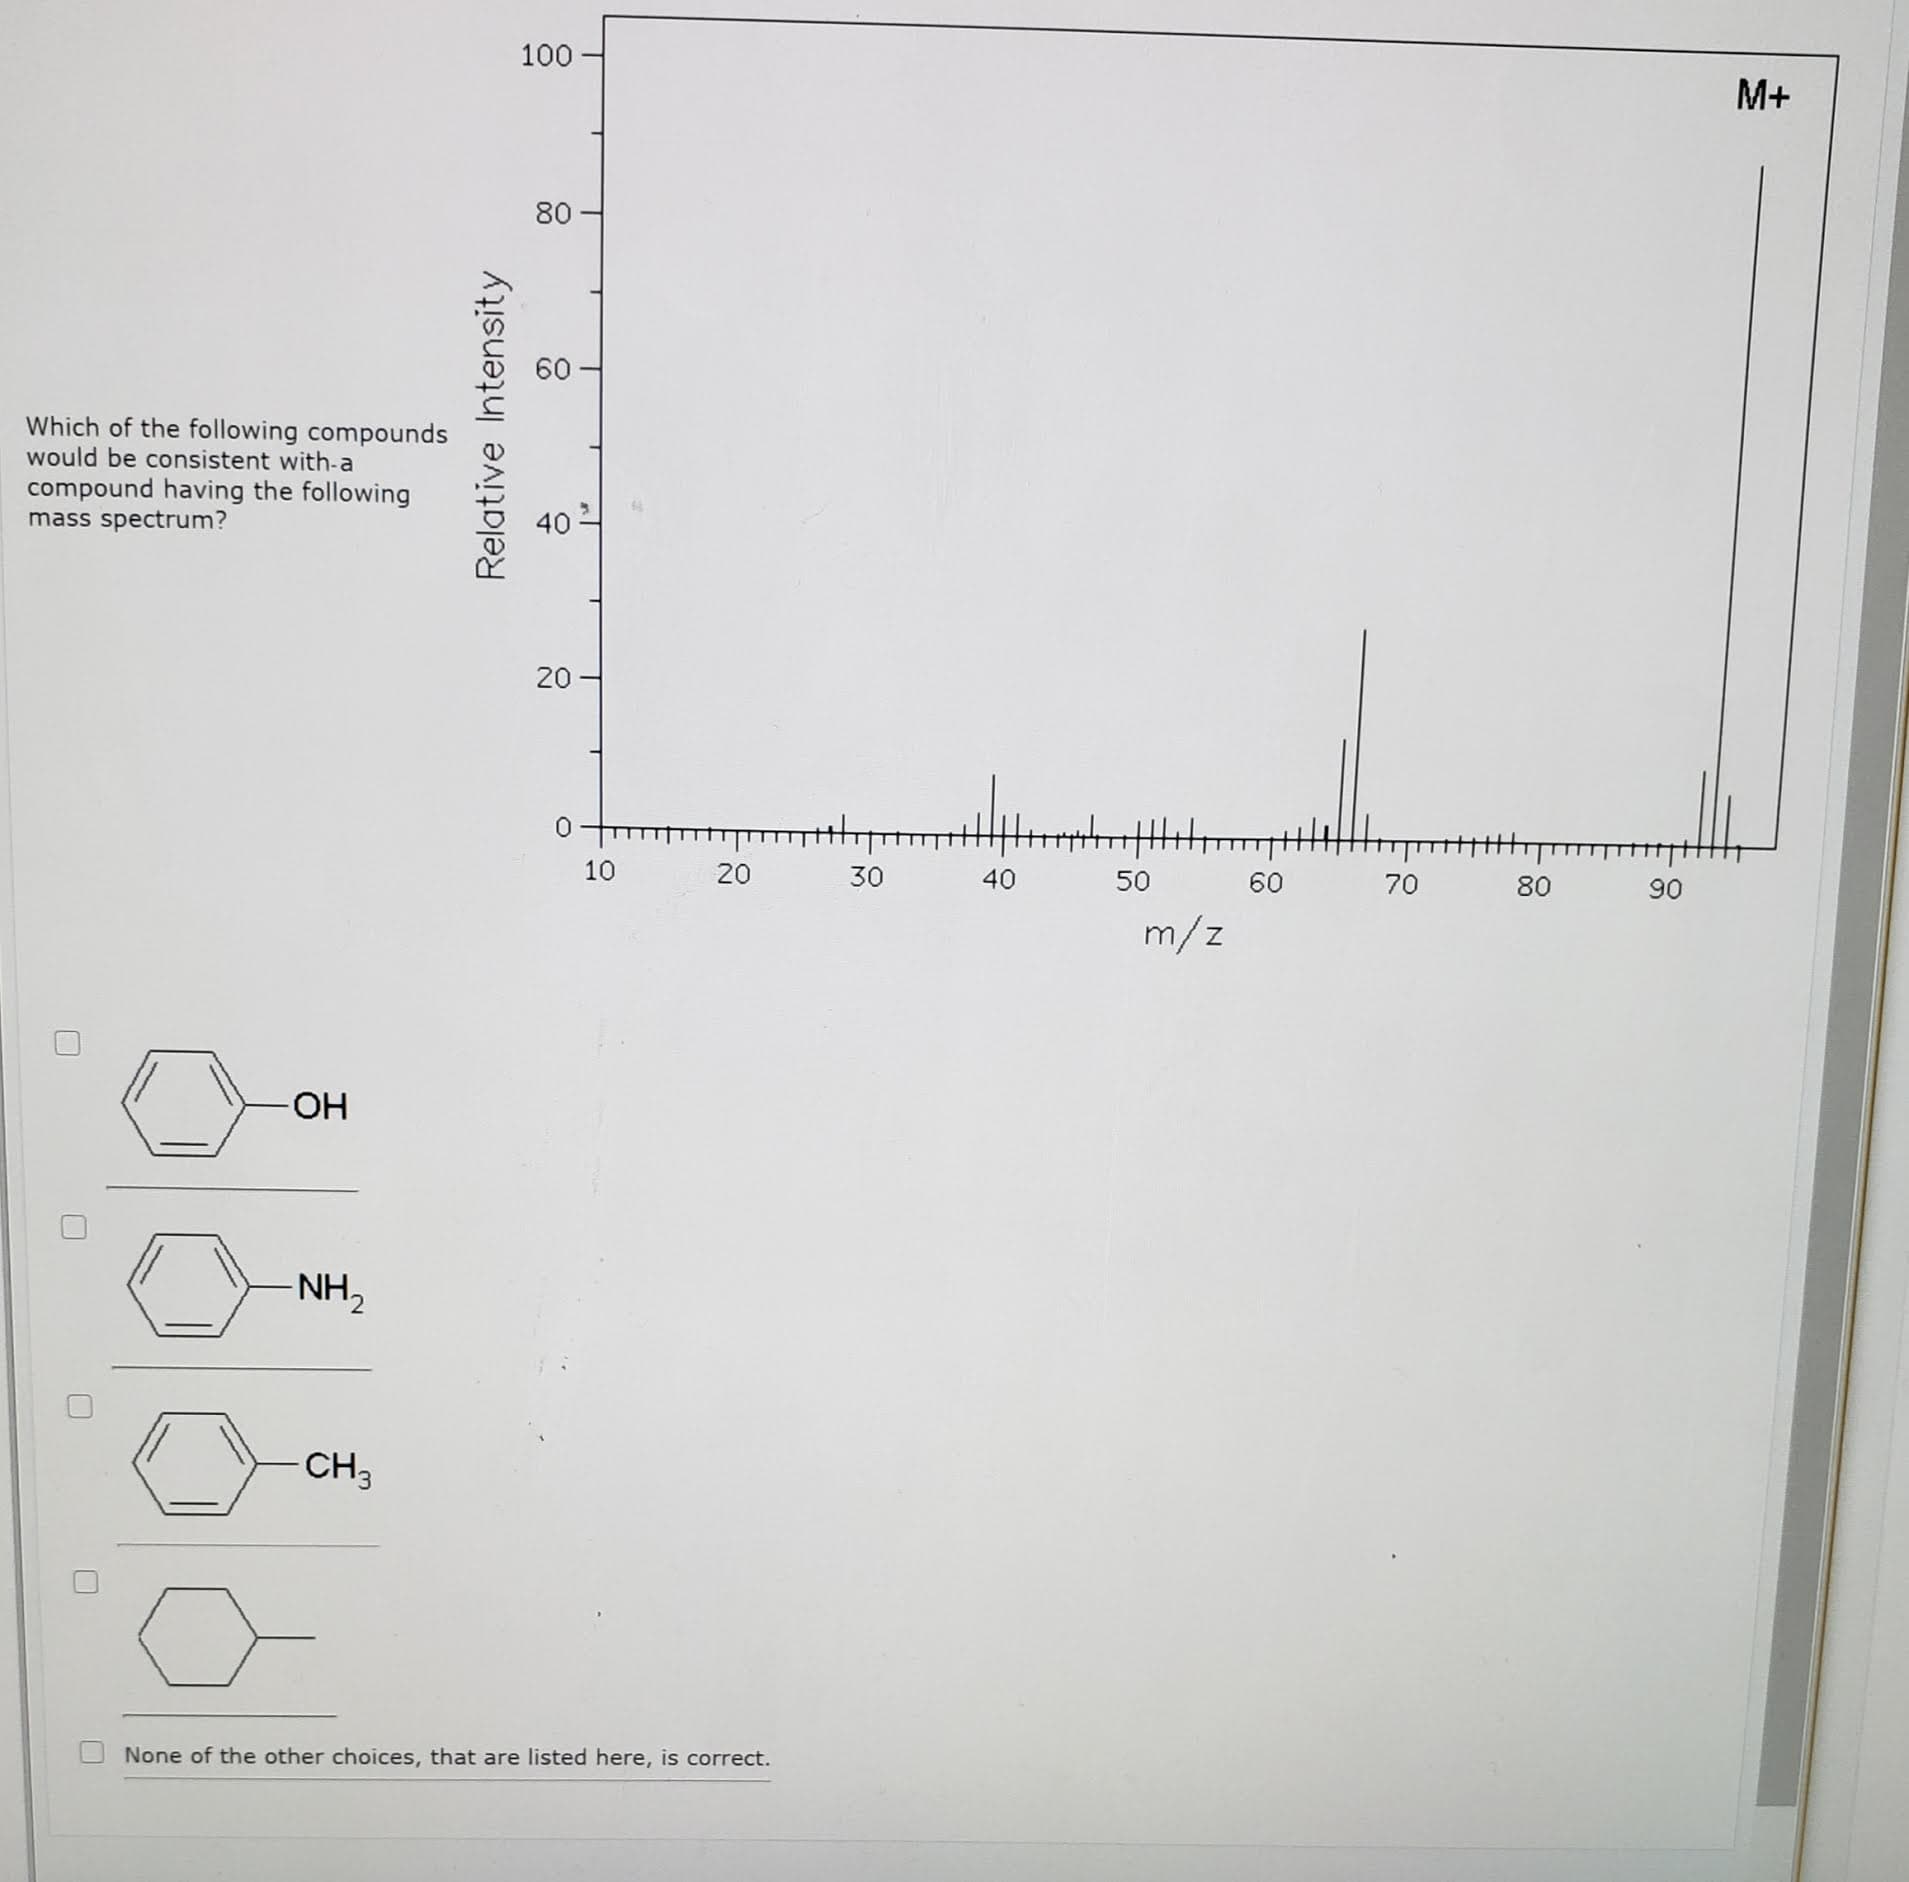 100 -
M+
80
60
Which of the following compounds
would be consistent with-a
compound having the following
mass spectrum?
40
20
10
30
40
50
60
70
80
90
m/z
O-
NH,
CH3
None of the other choices, that are listed here, is correct.
Relative Intensity
20
